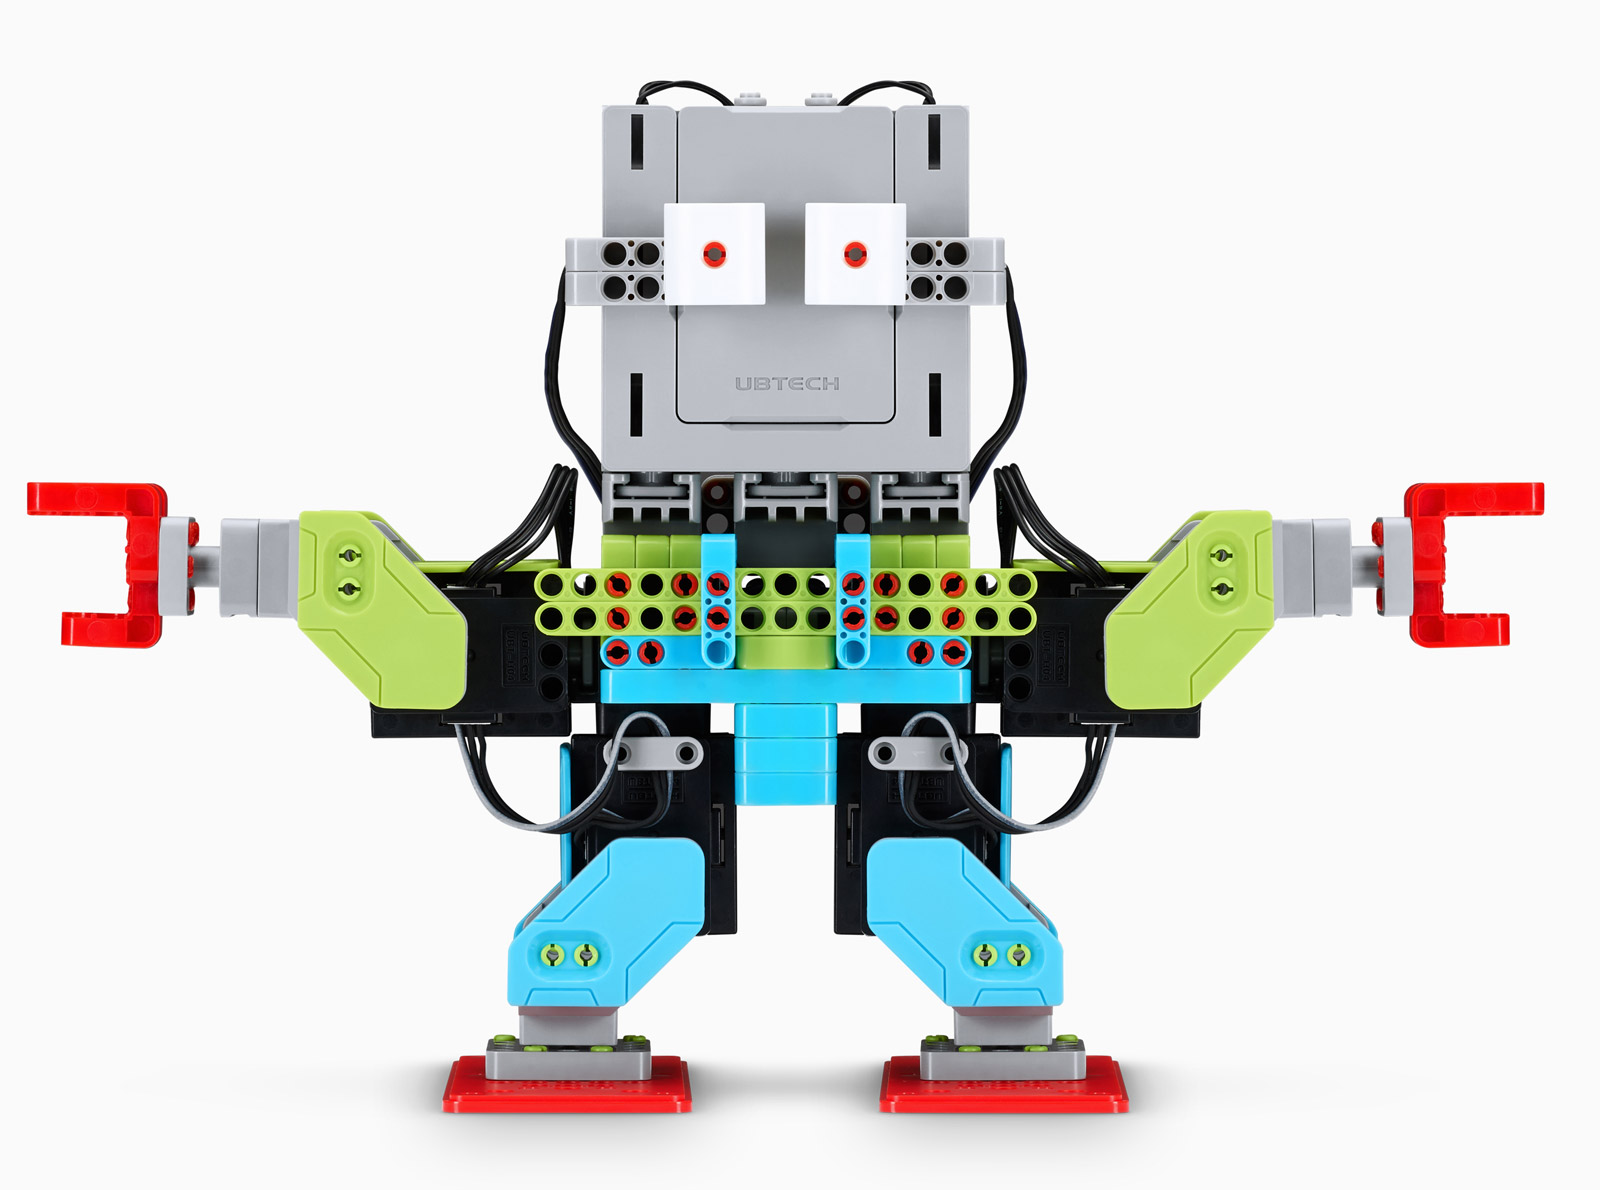 Robots controlables con Swift Playgrounds